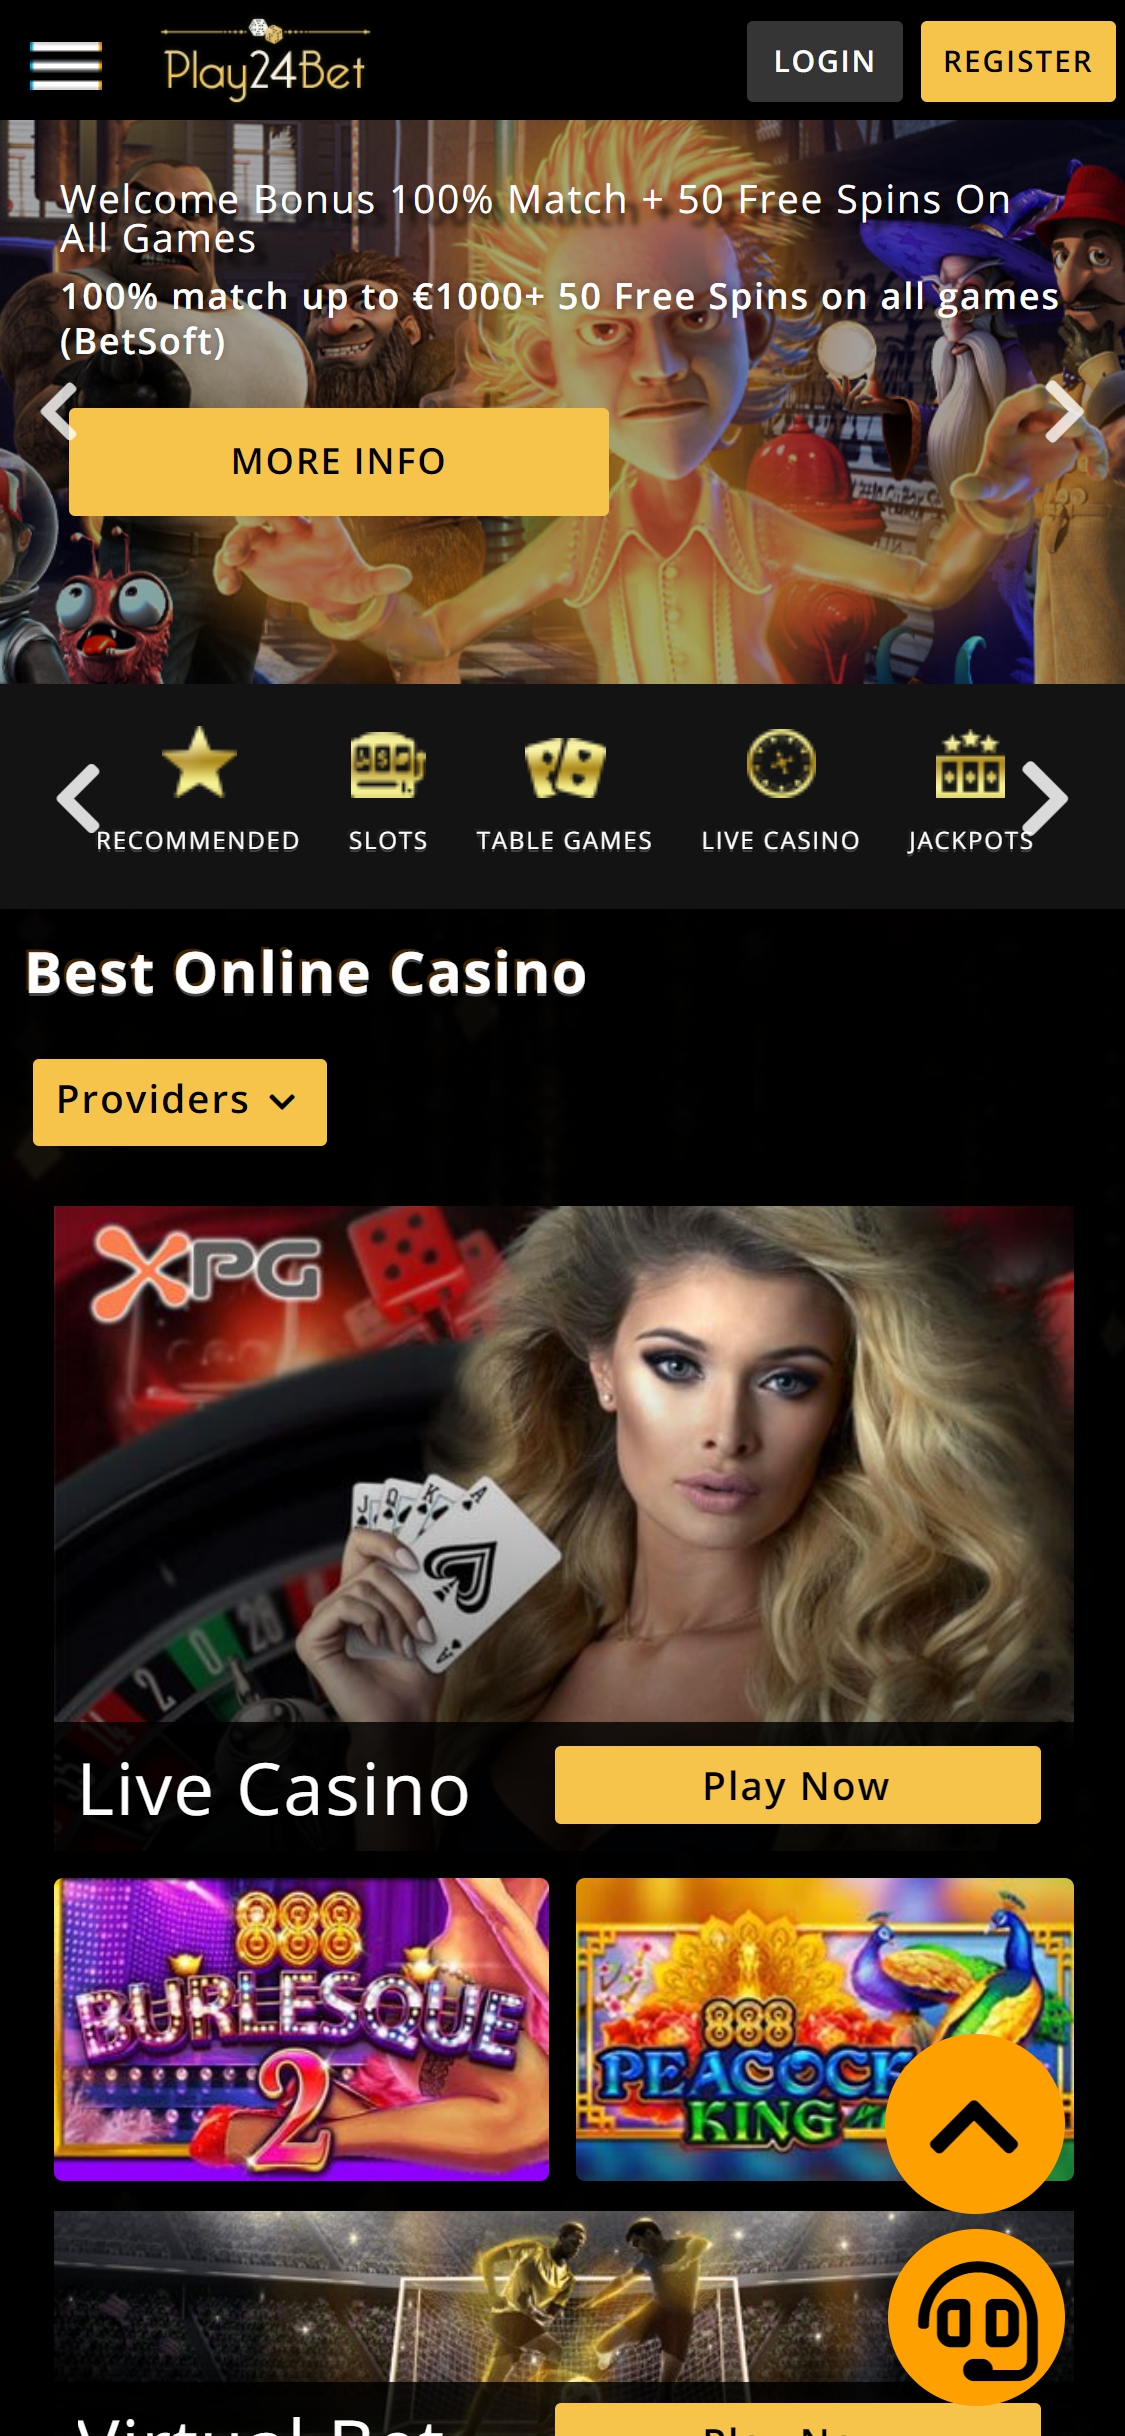 Play 24 Bet Casino Mobile Review